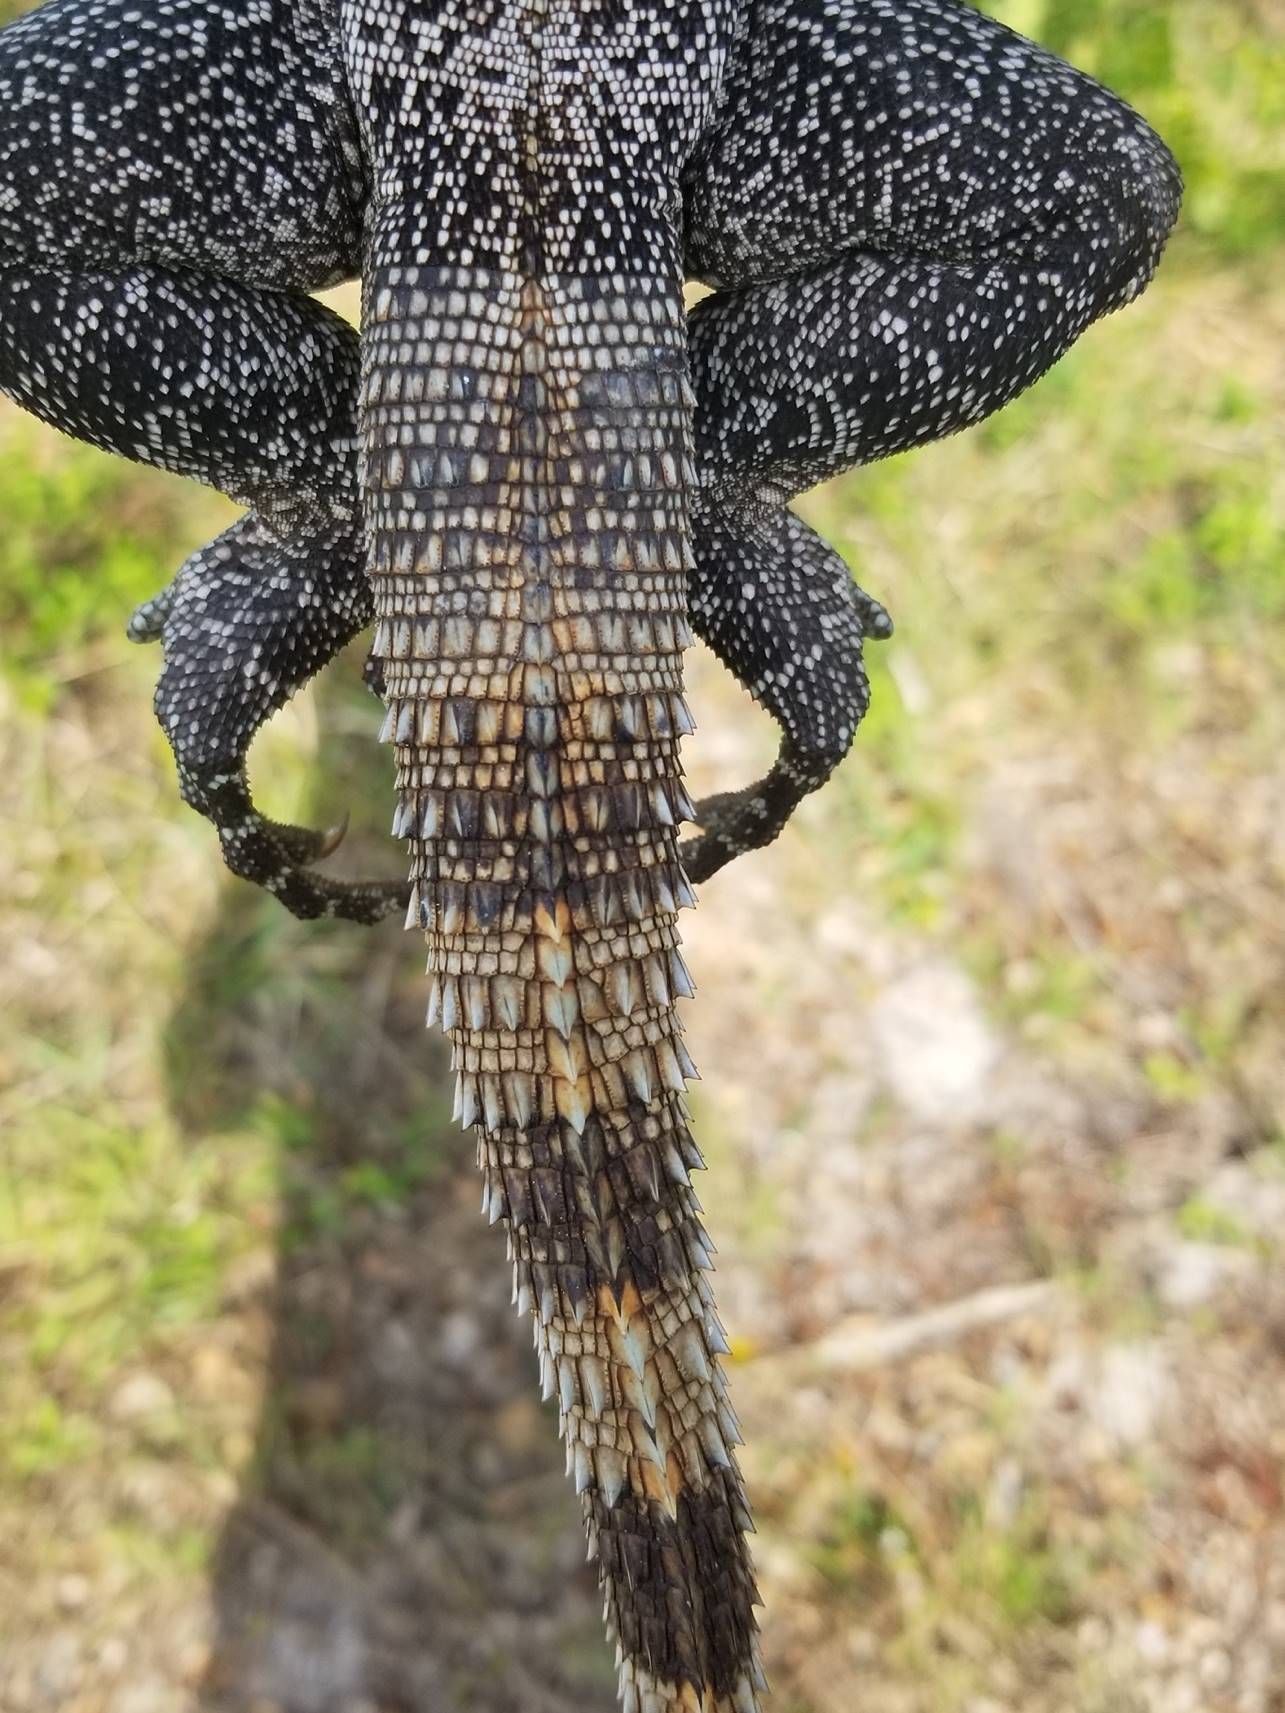 Tail of an adult black spiny-tailed iguana.